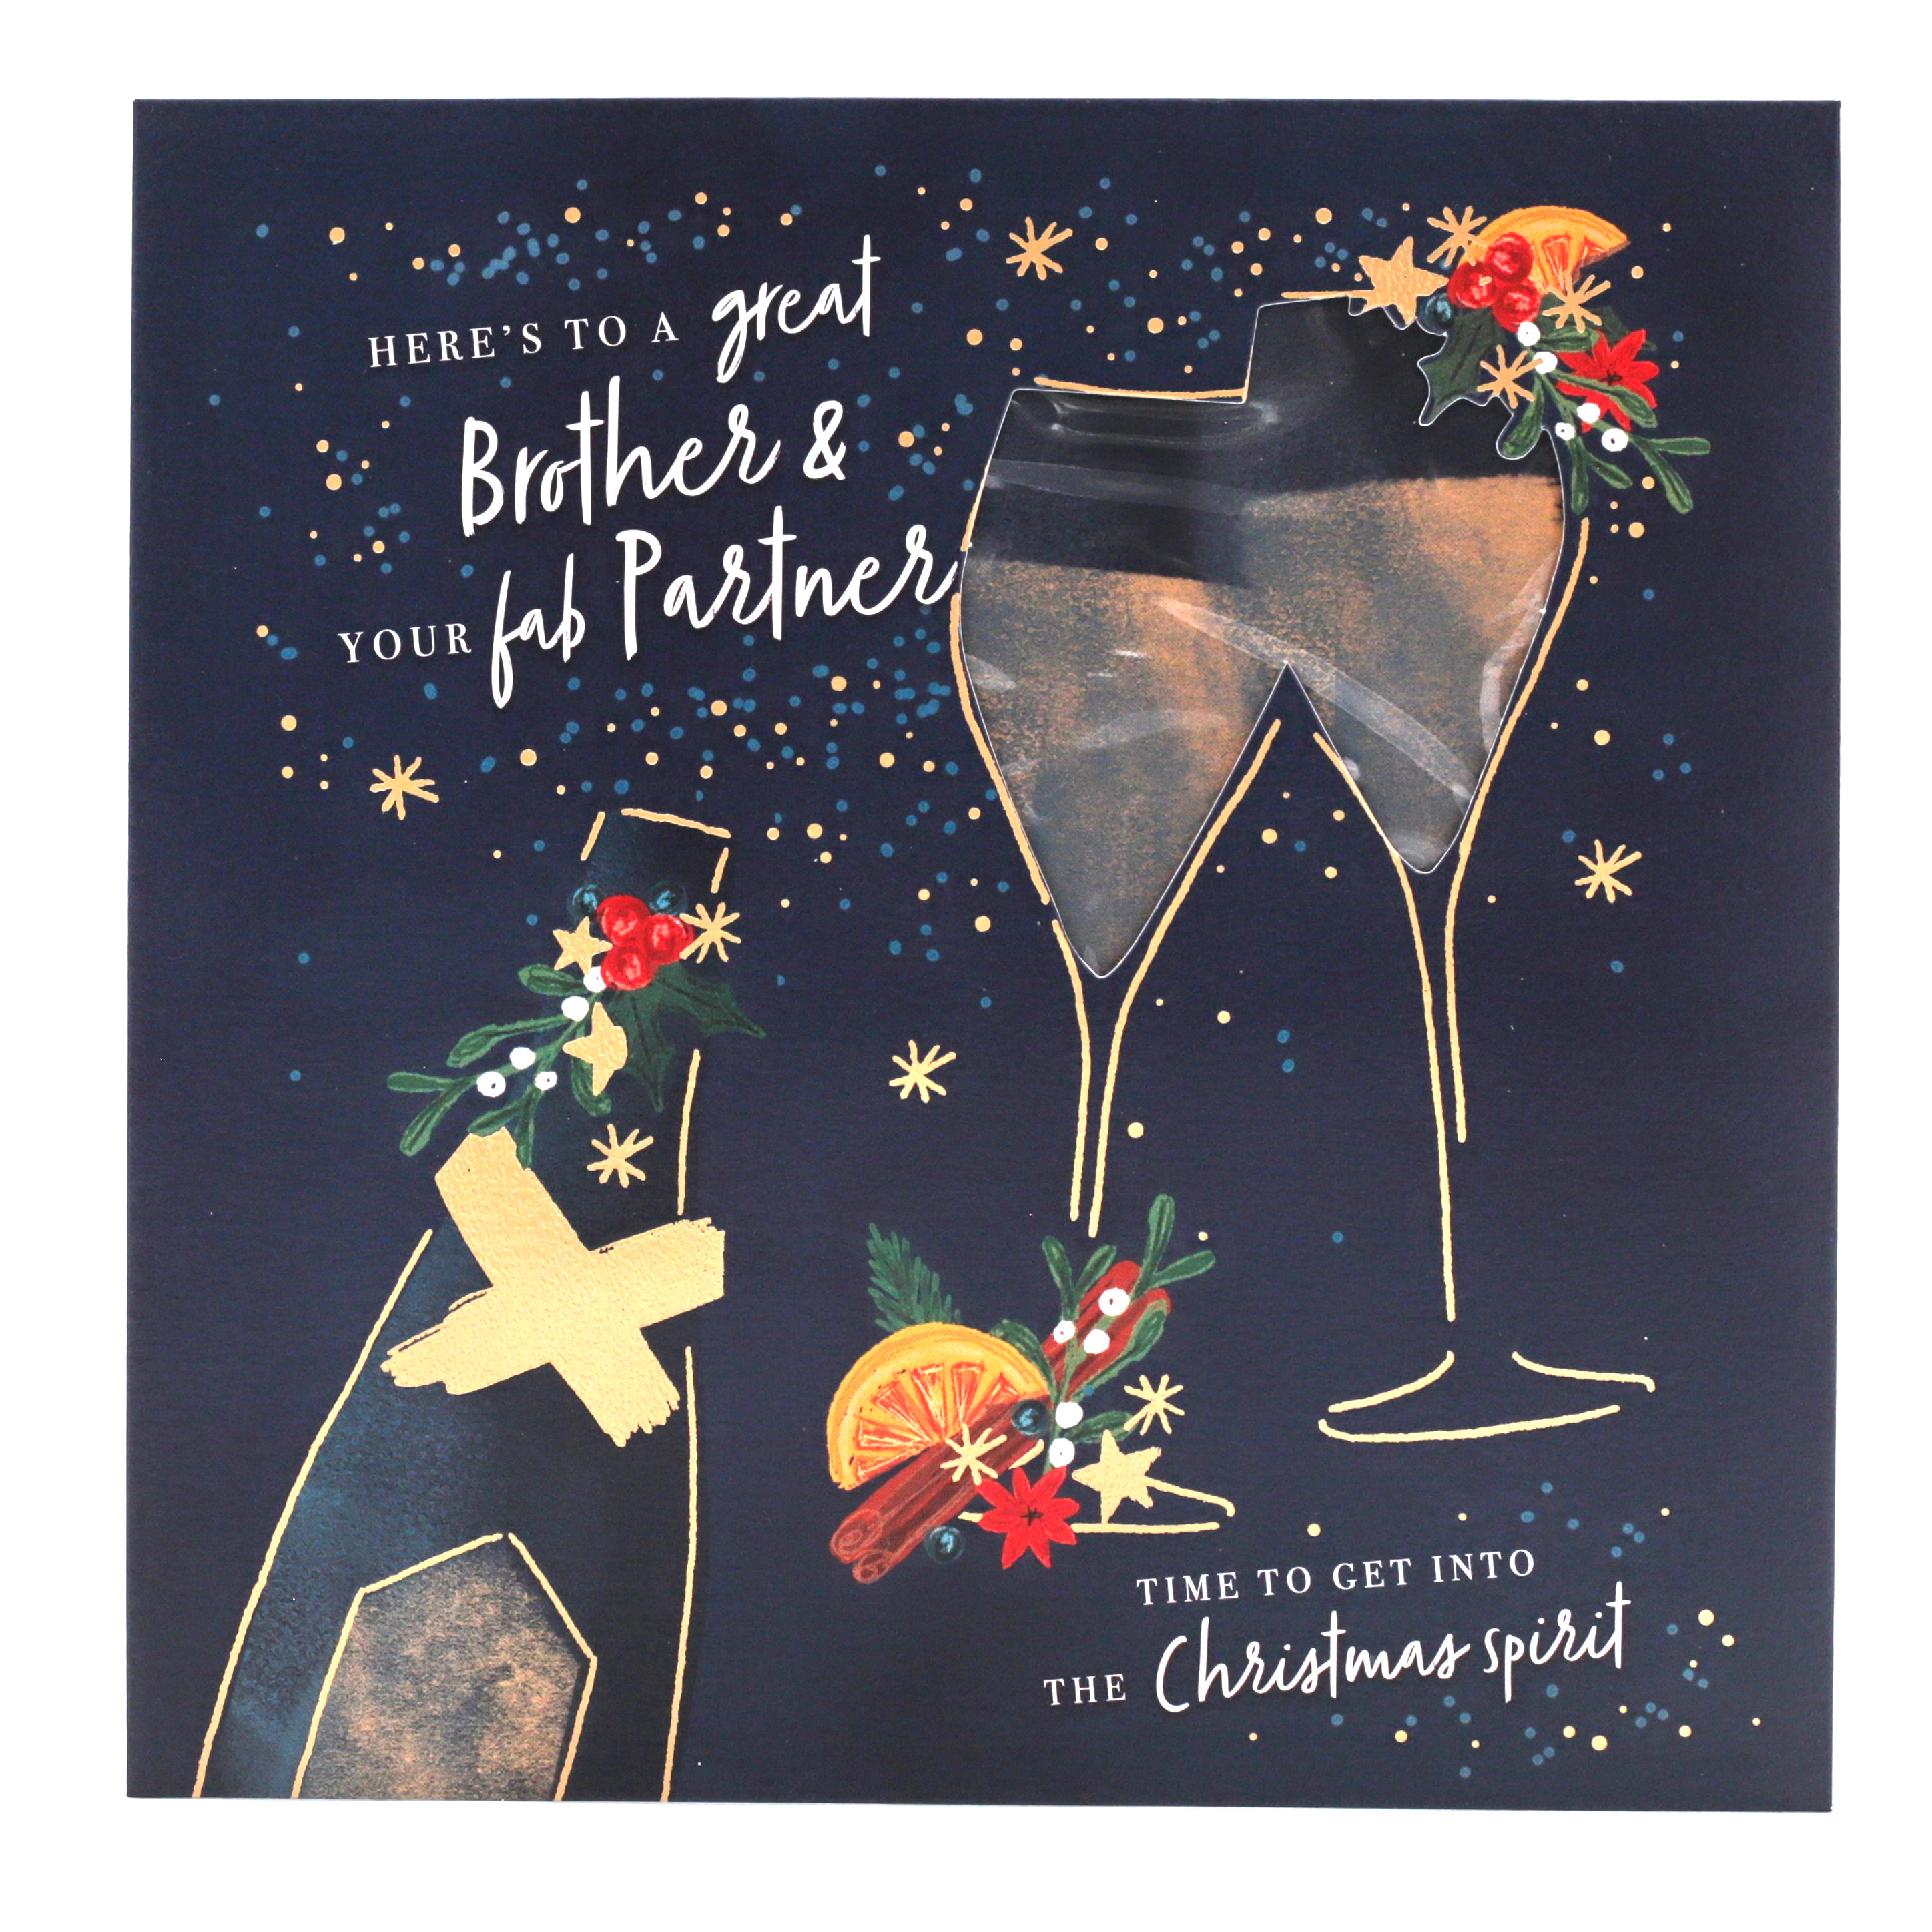 Exquisite Collection Christmas Card - Brother And Partner, Christmas Spirit